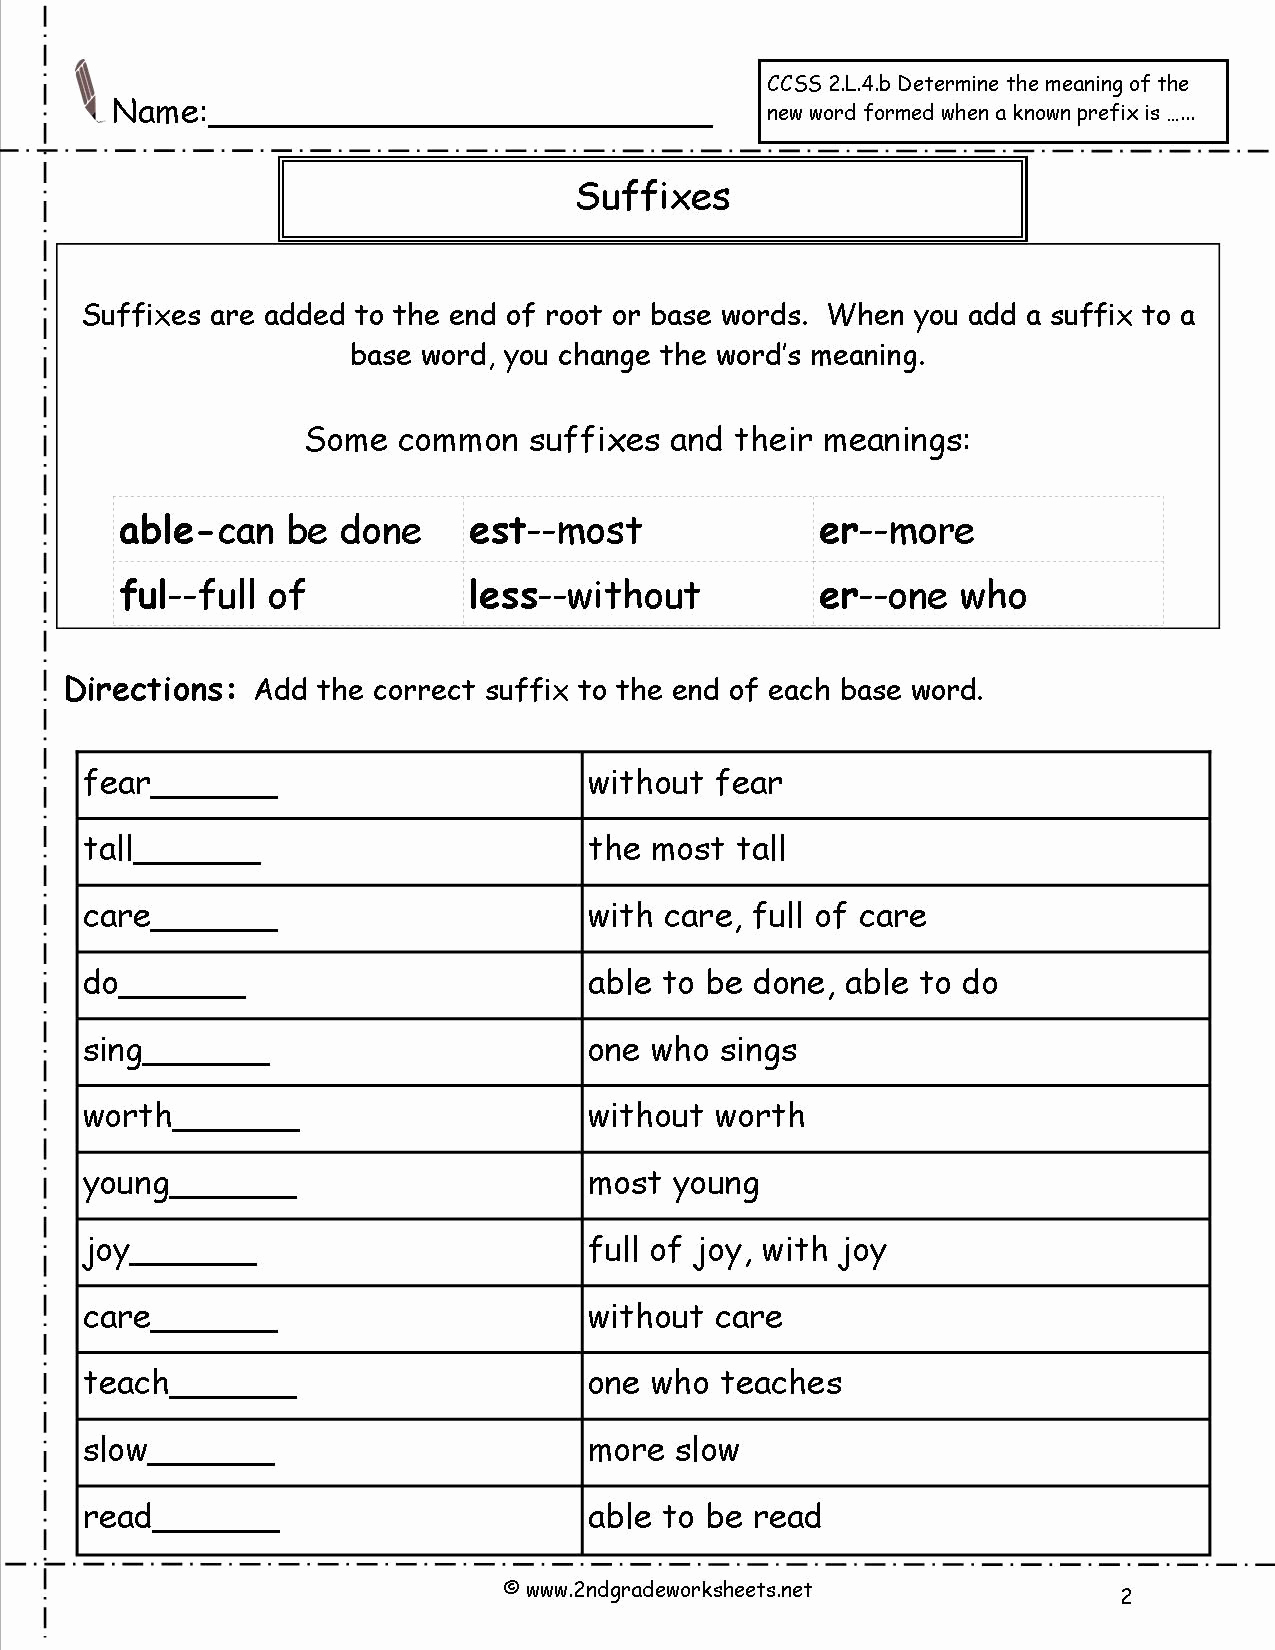 Suffix Worksheets 4th Grade Inspirational 20 Suffix Worksheets for 4th Grade